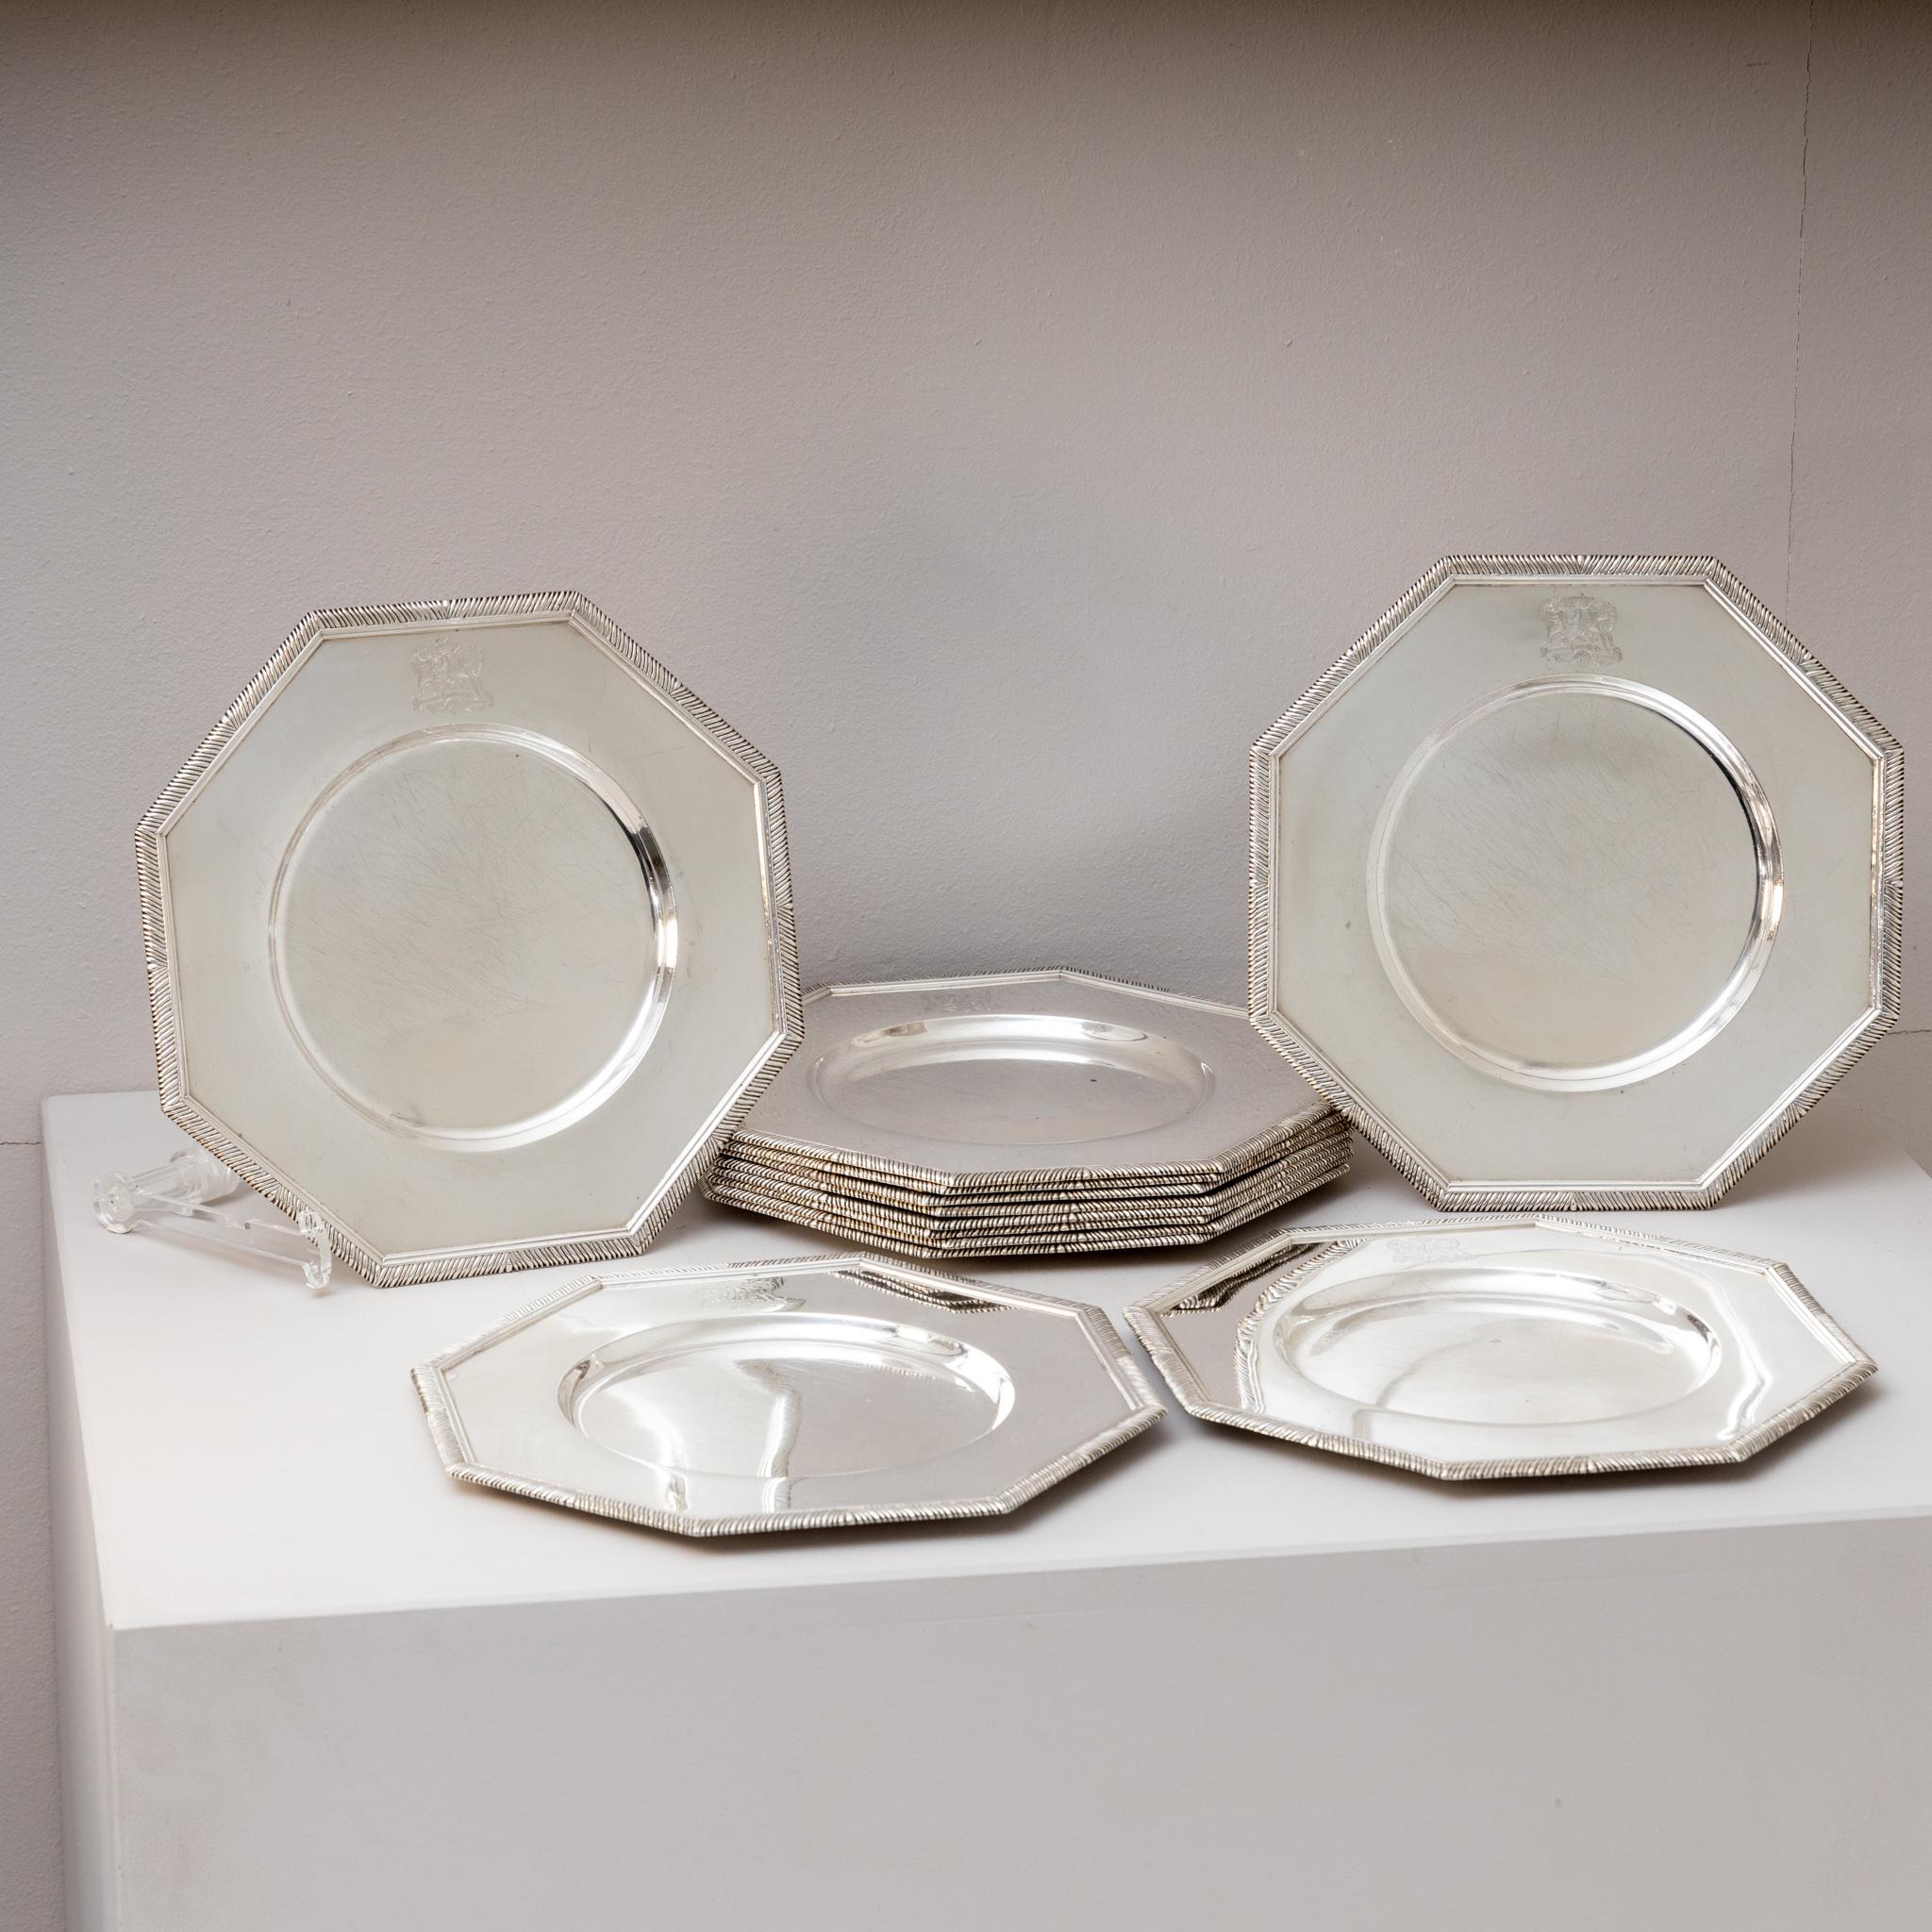 Set of twelve silver plates in octagonal shape and round mirror. Each plate is decorated with a coat of arms with the motto 